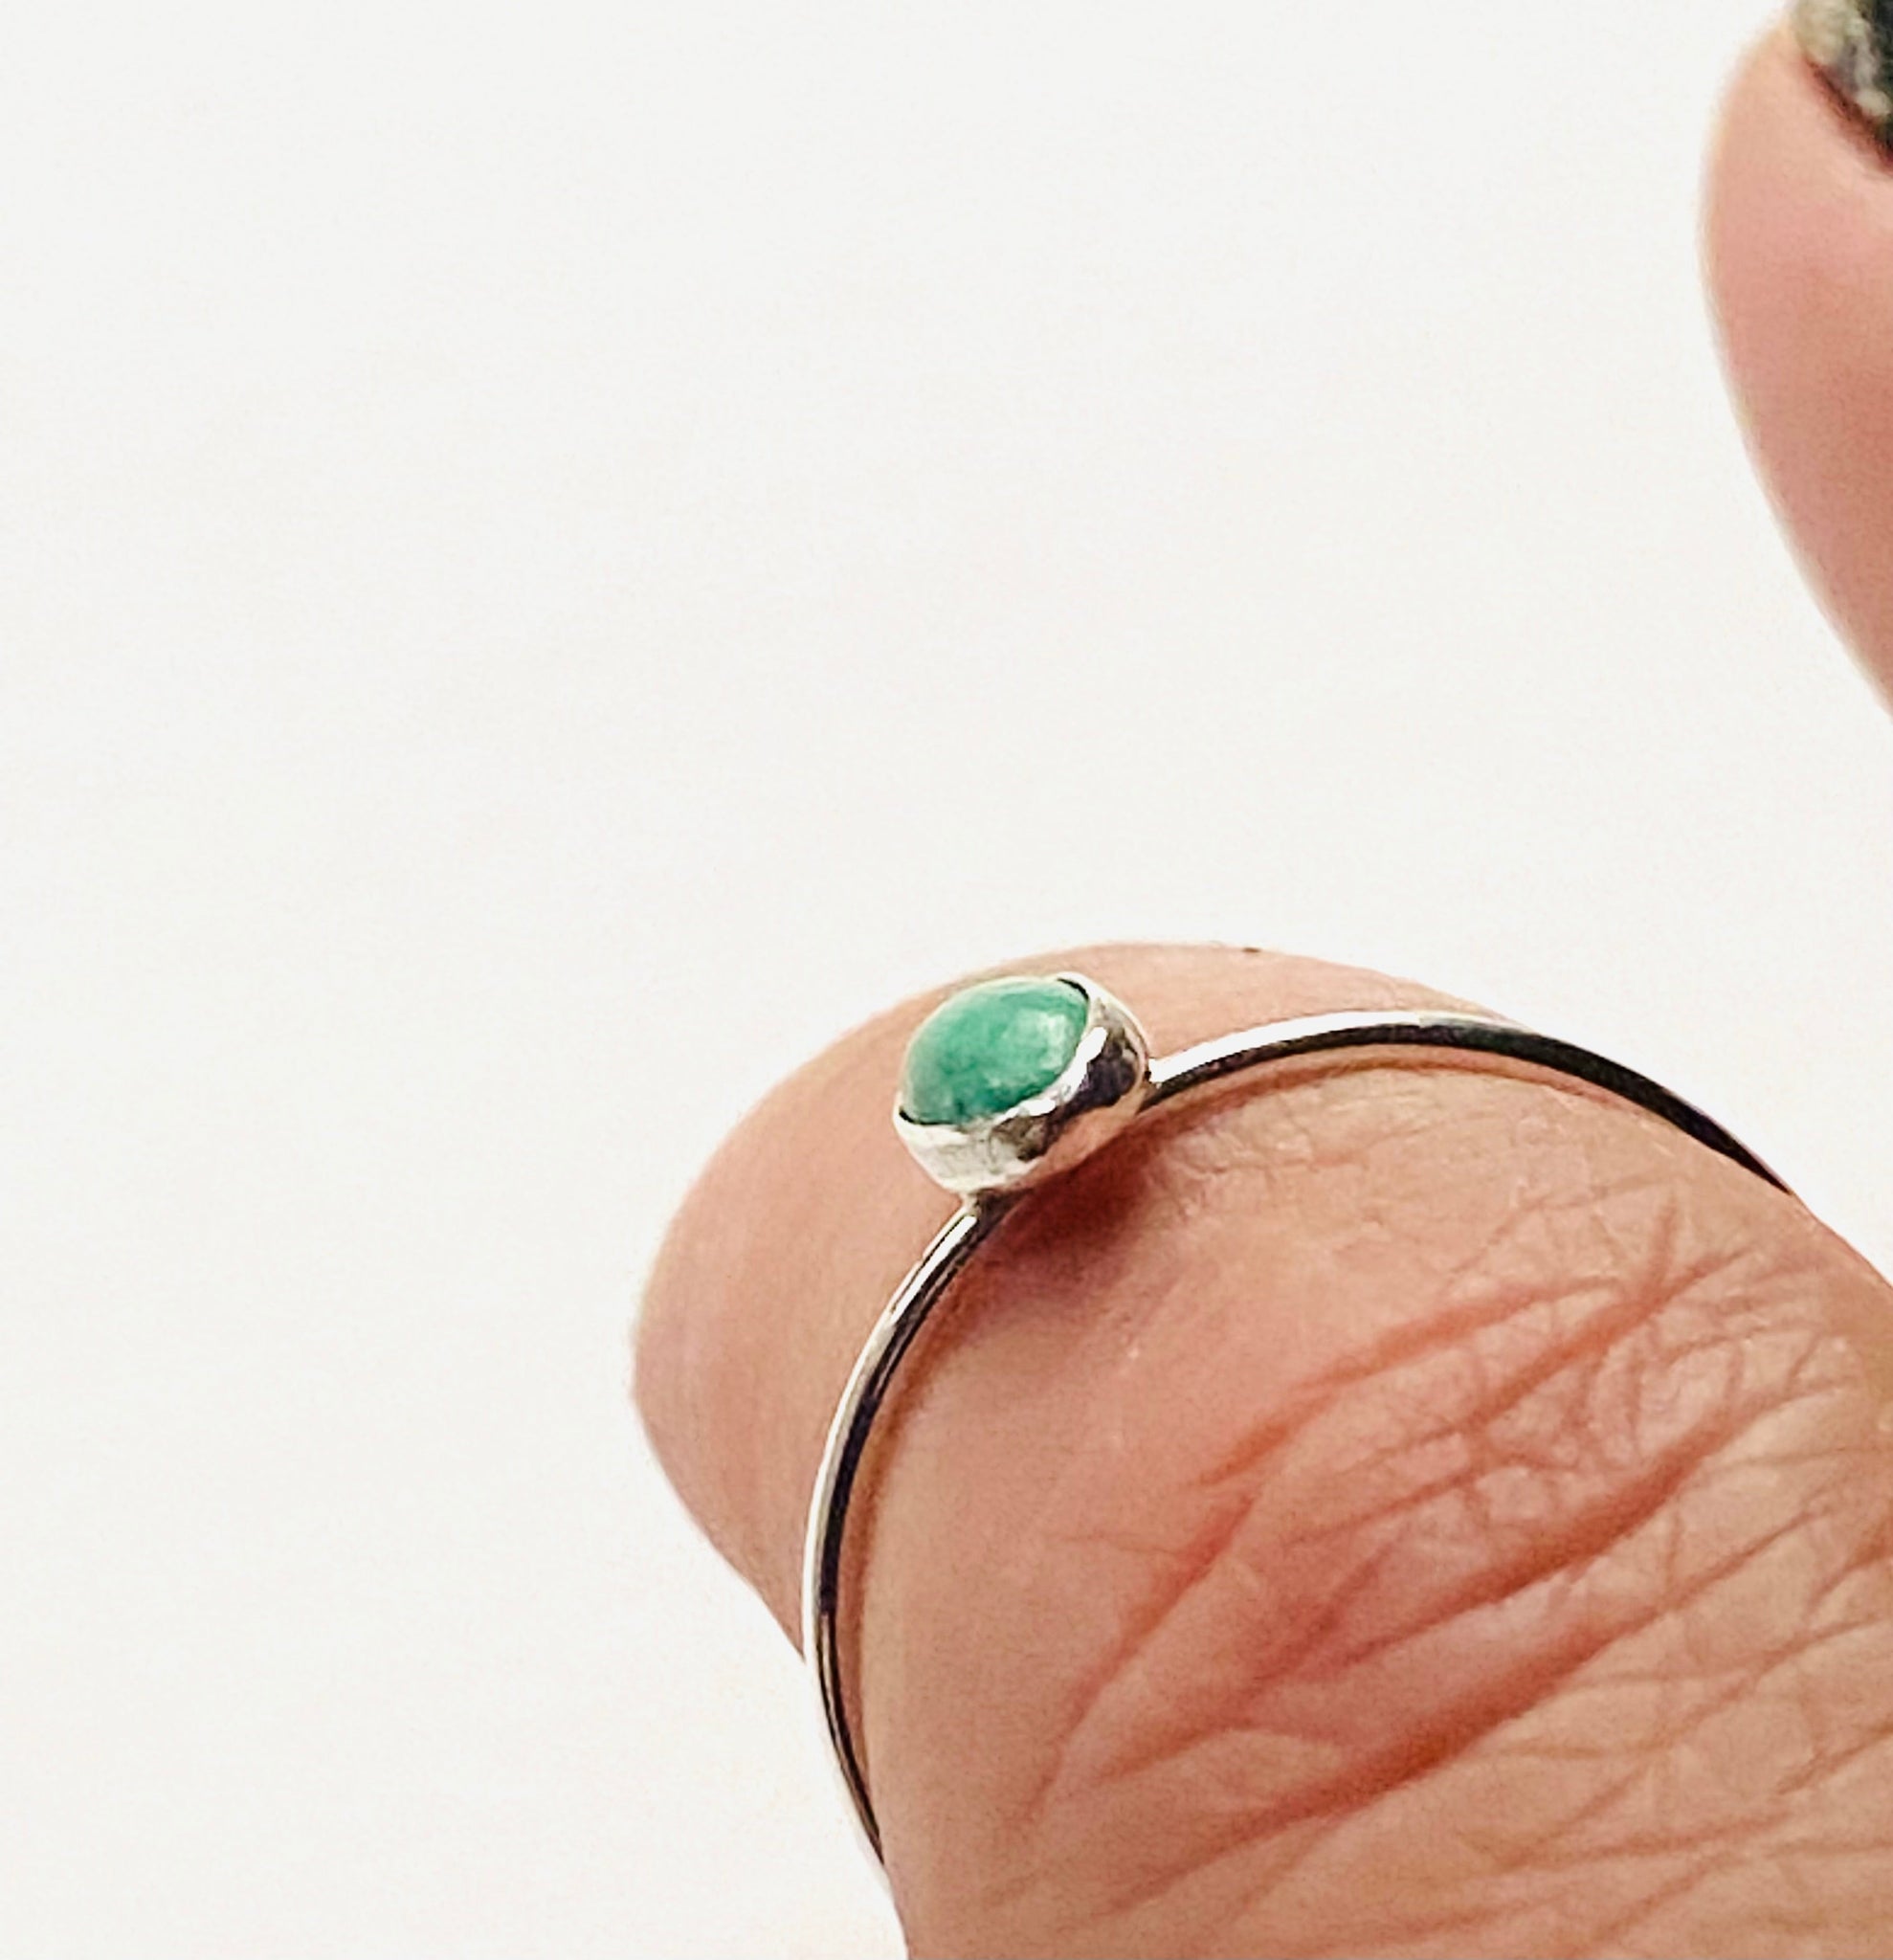 Turquoise Ring, Genuine Turquoise Sterling Ring - size 7.5 Janine Gerade